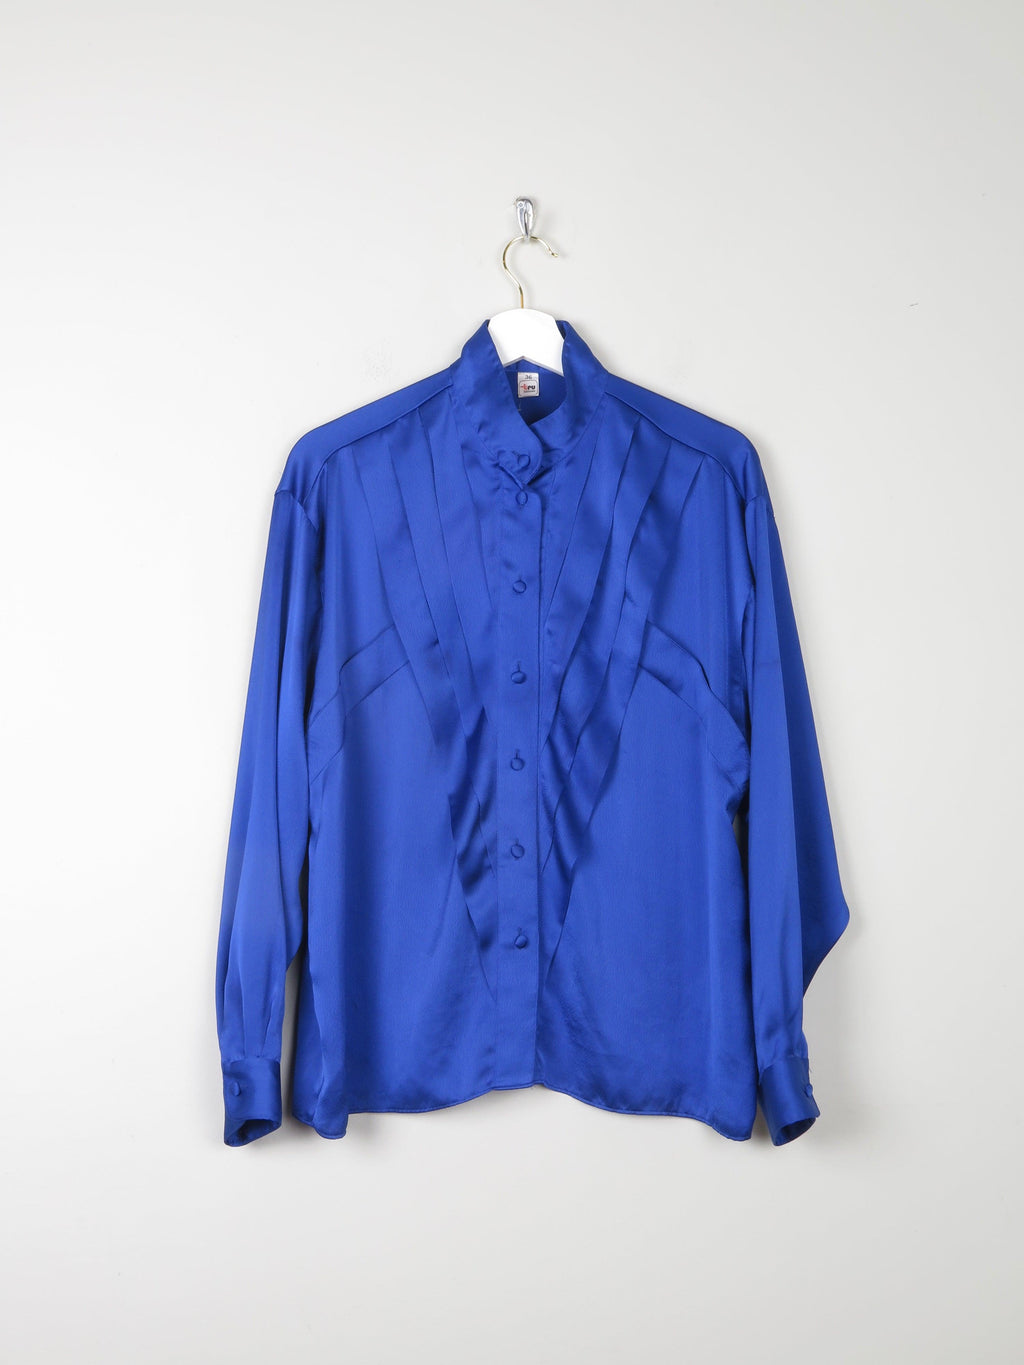 Women's Electric Blue Satin Blouse S/M - The Harlequin